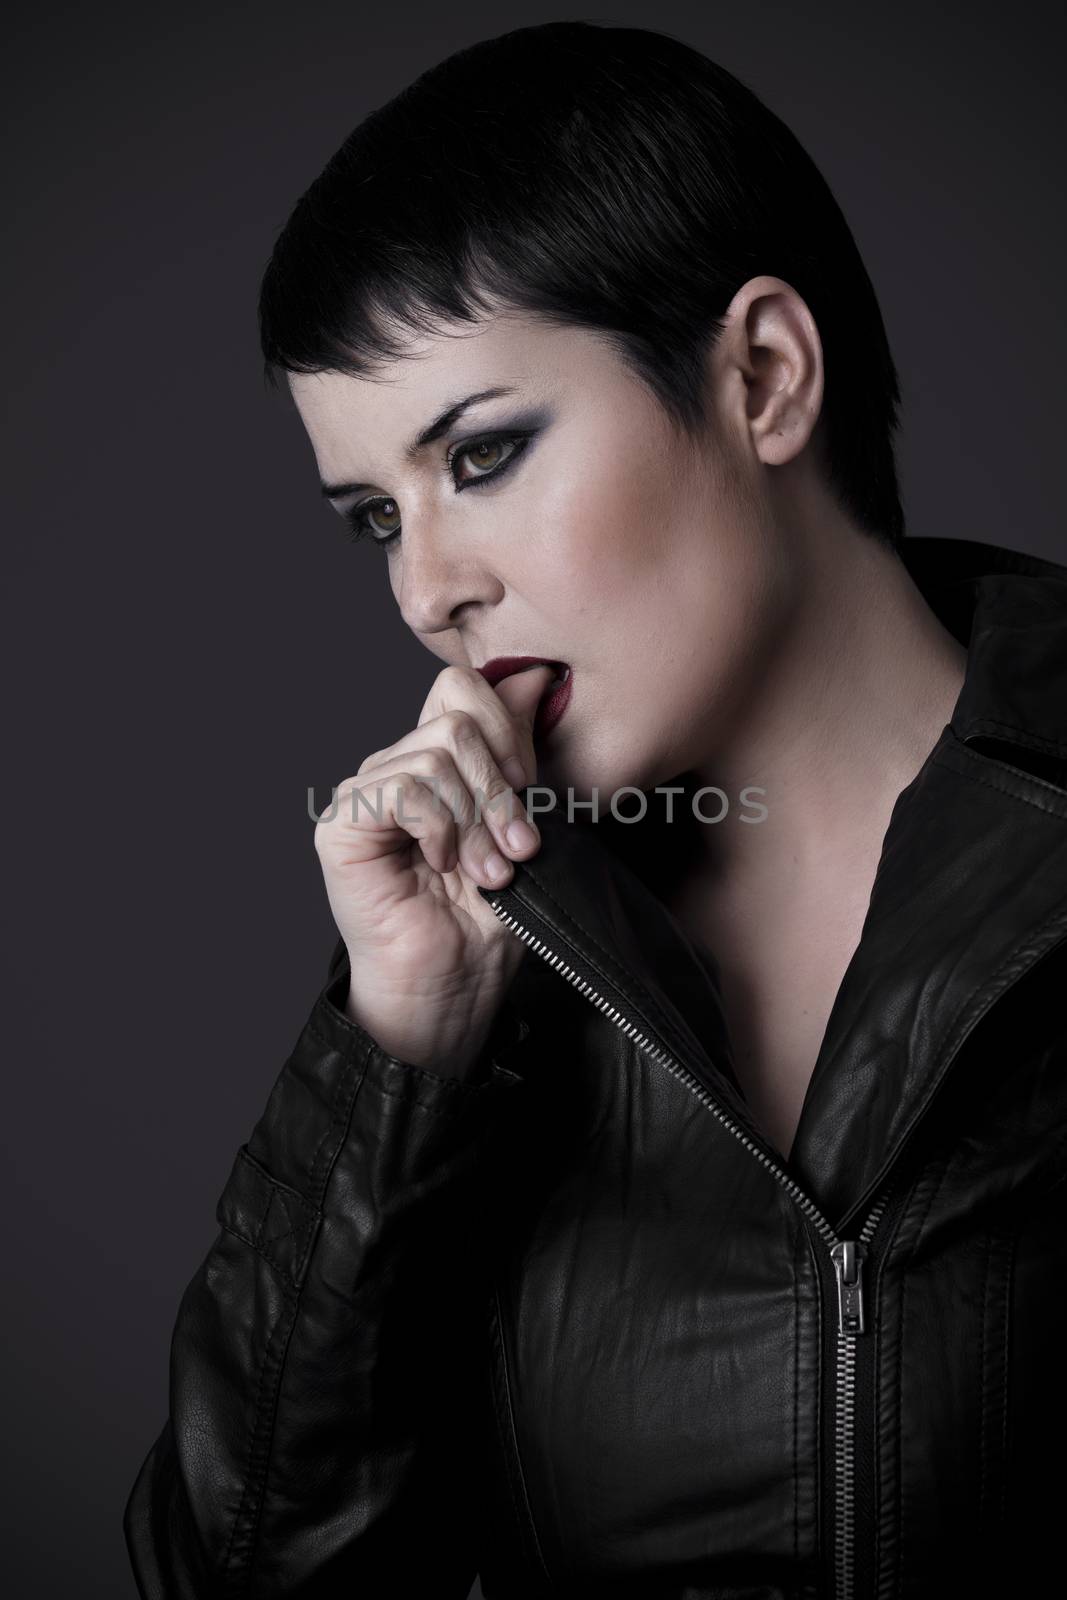 Proud sexy woman with black leather jacket biting her finger by FernandoCortes